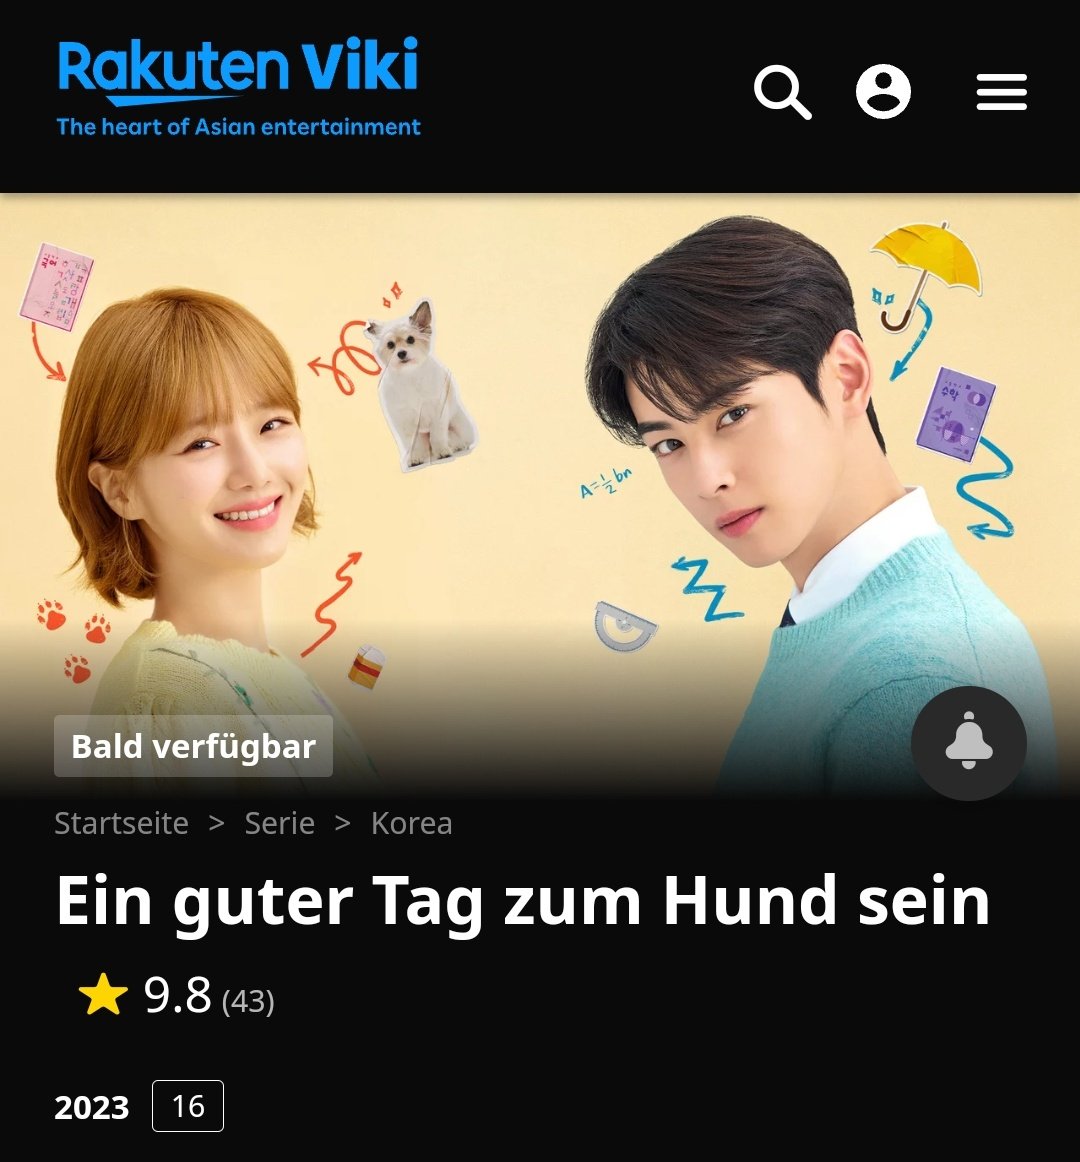 Fellow german #AROHA and actor #CHAEUNWOO fans, we can watch the newest drama #agooddaytobeadog in #RakutenViki / SO GET YOUR #viki pass NOW🙌✨💖😍 it's available in ca.5€/mon. or 49€/ year rates! PS: True Beauty, MIIGB, Hit the Top,and his other dramas r here too! 🤭